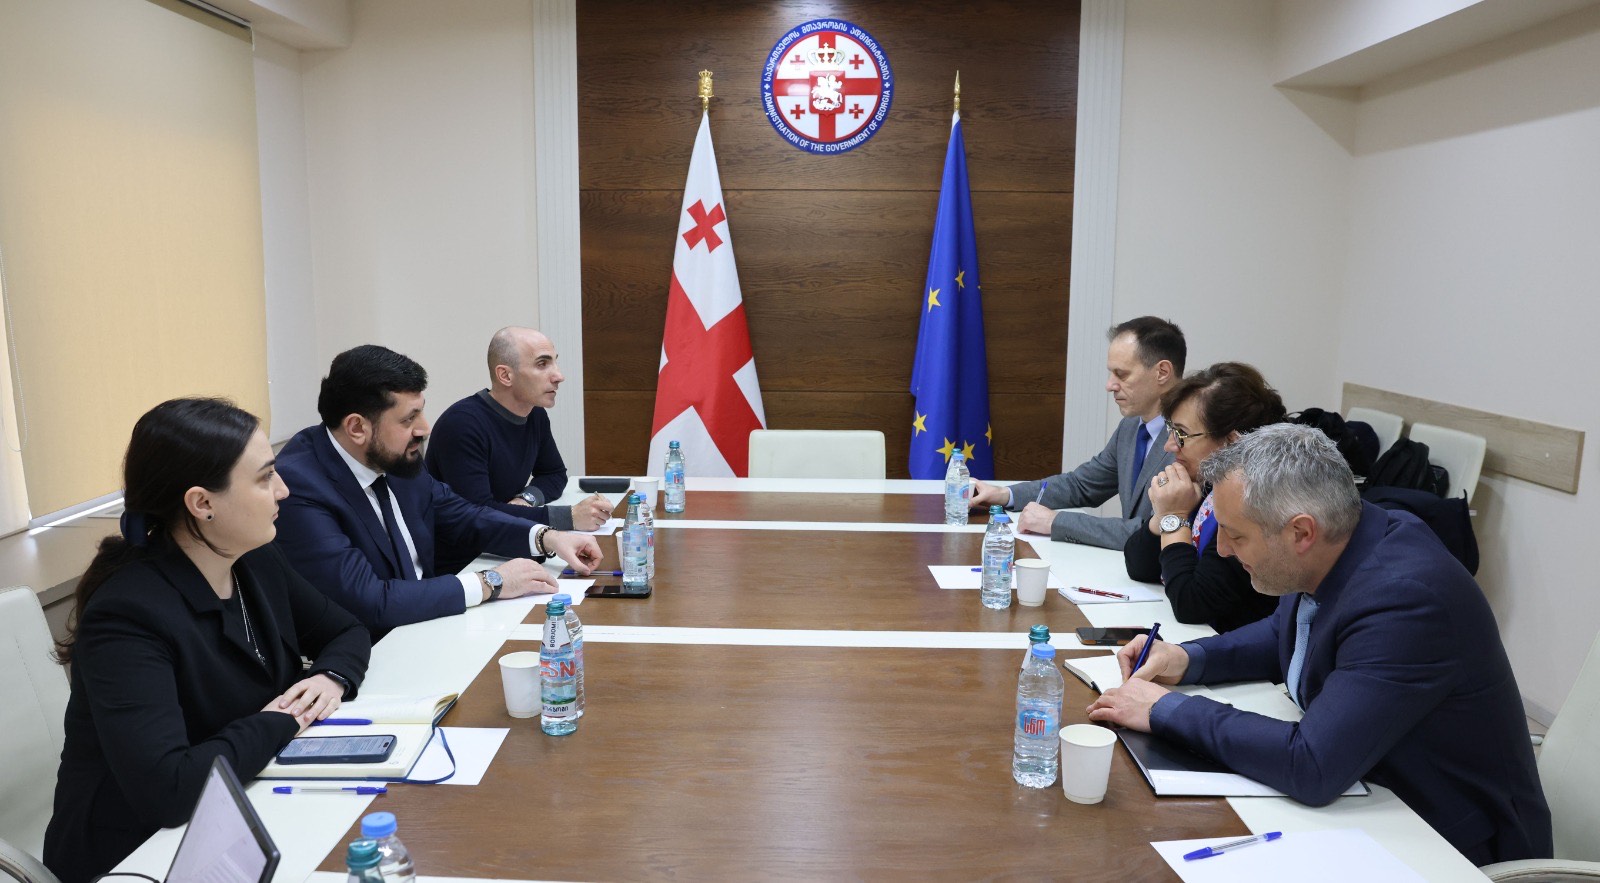 Razhden Kuprashvili, the Head of the Anti-Corruption Bureau, met with representatives of the Council of Europe's Election Observation and Support Division